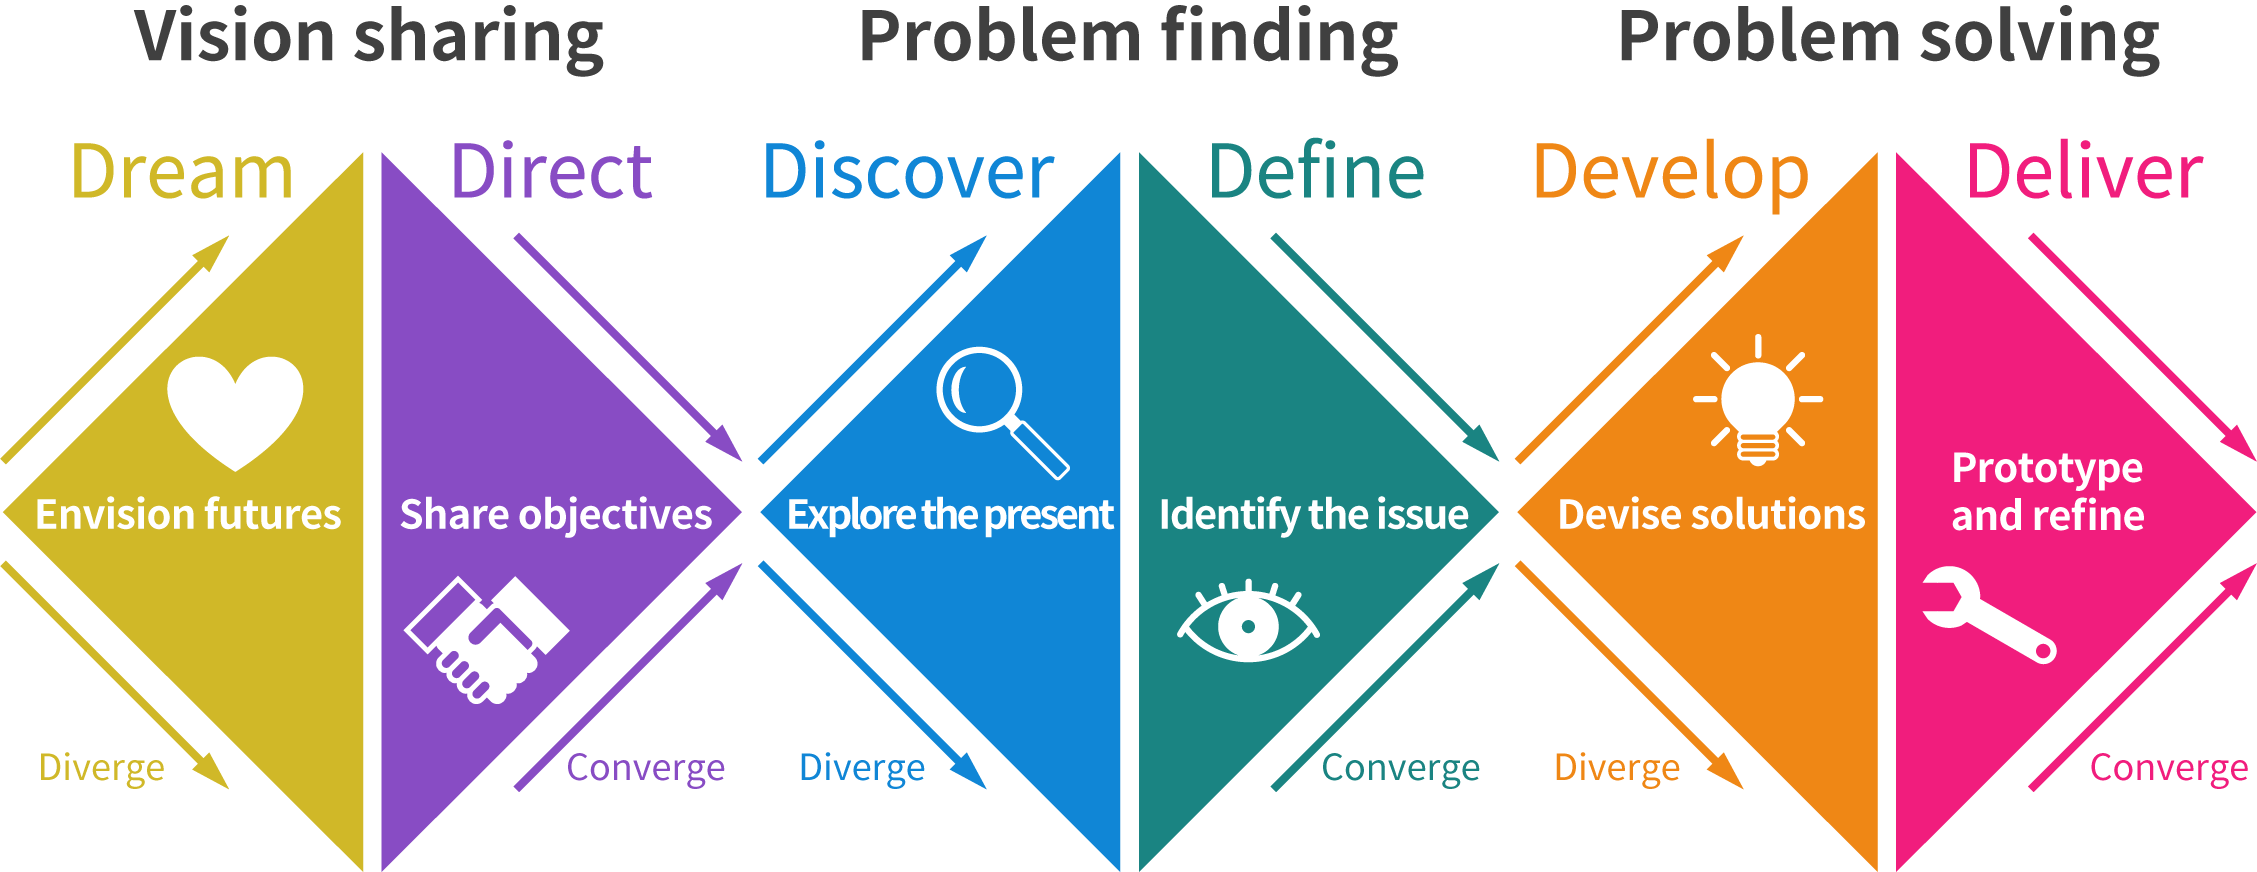 Customer Value Design process (the process used by the project for vision sharing)